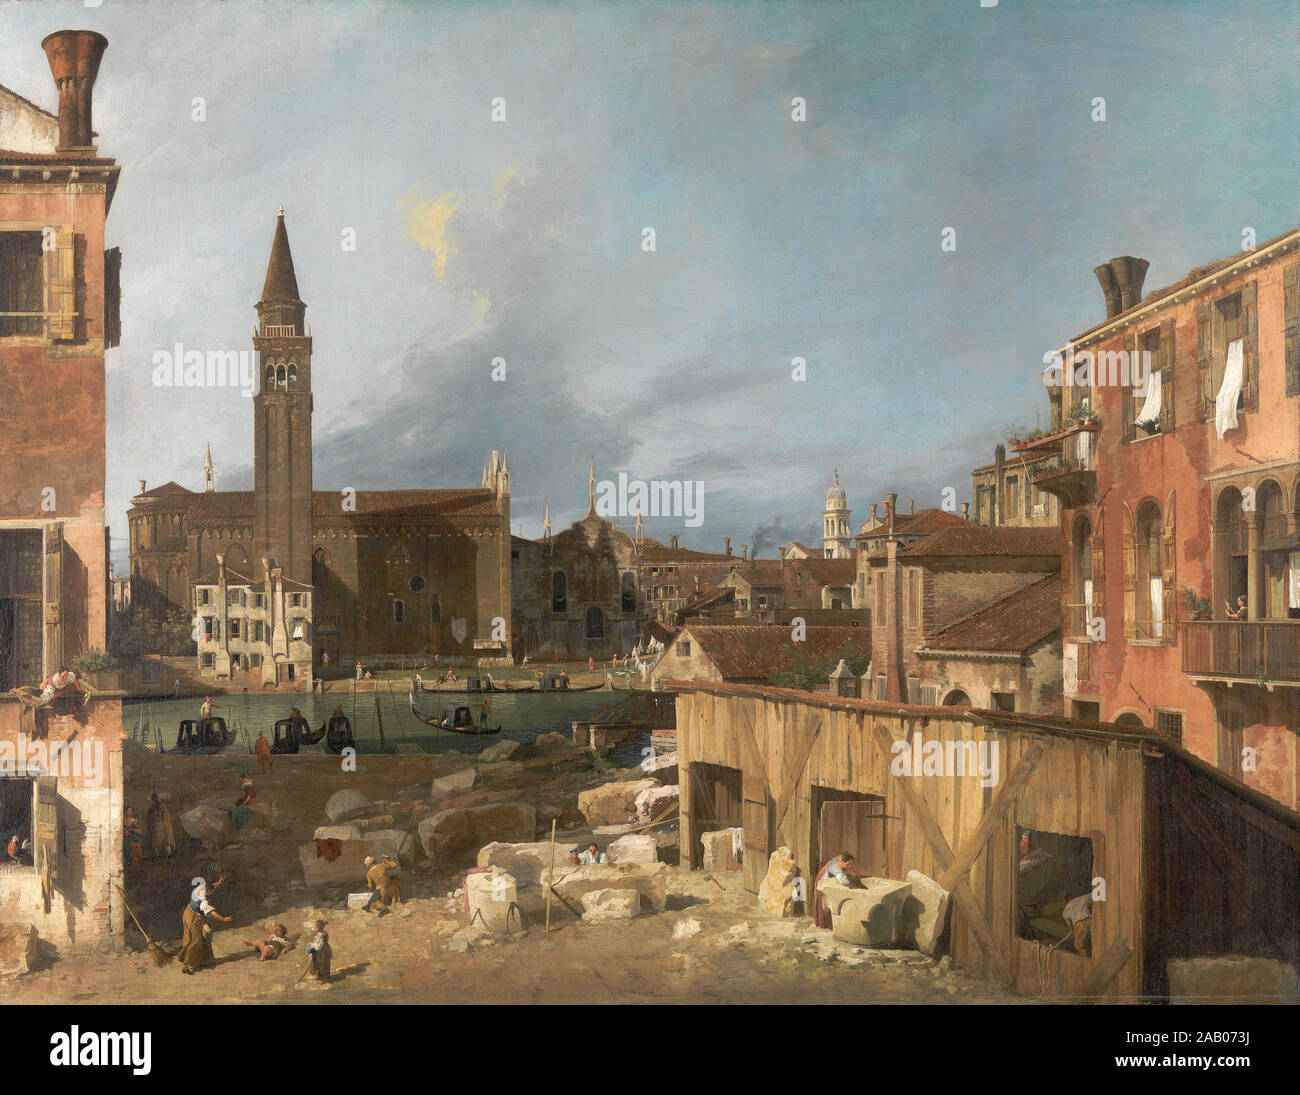 The Stonemason's Yard, painted by Canaletto c. 1725 Stock Photo